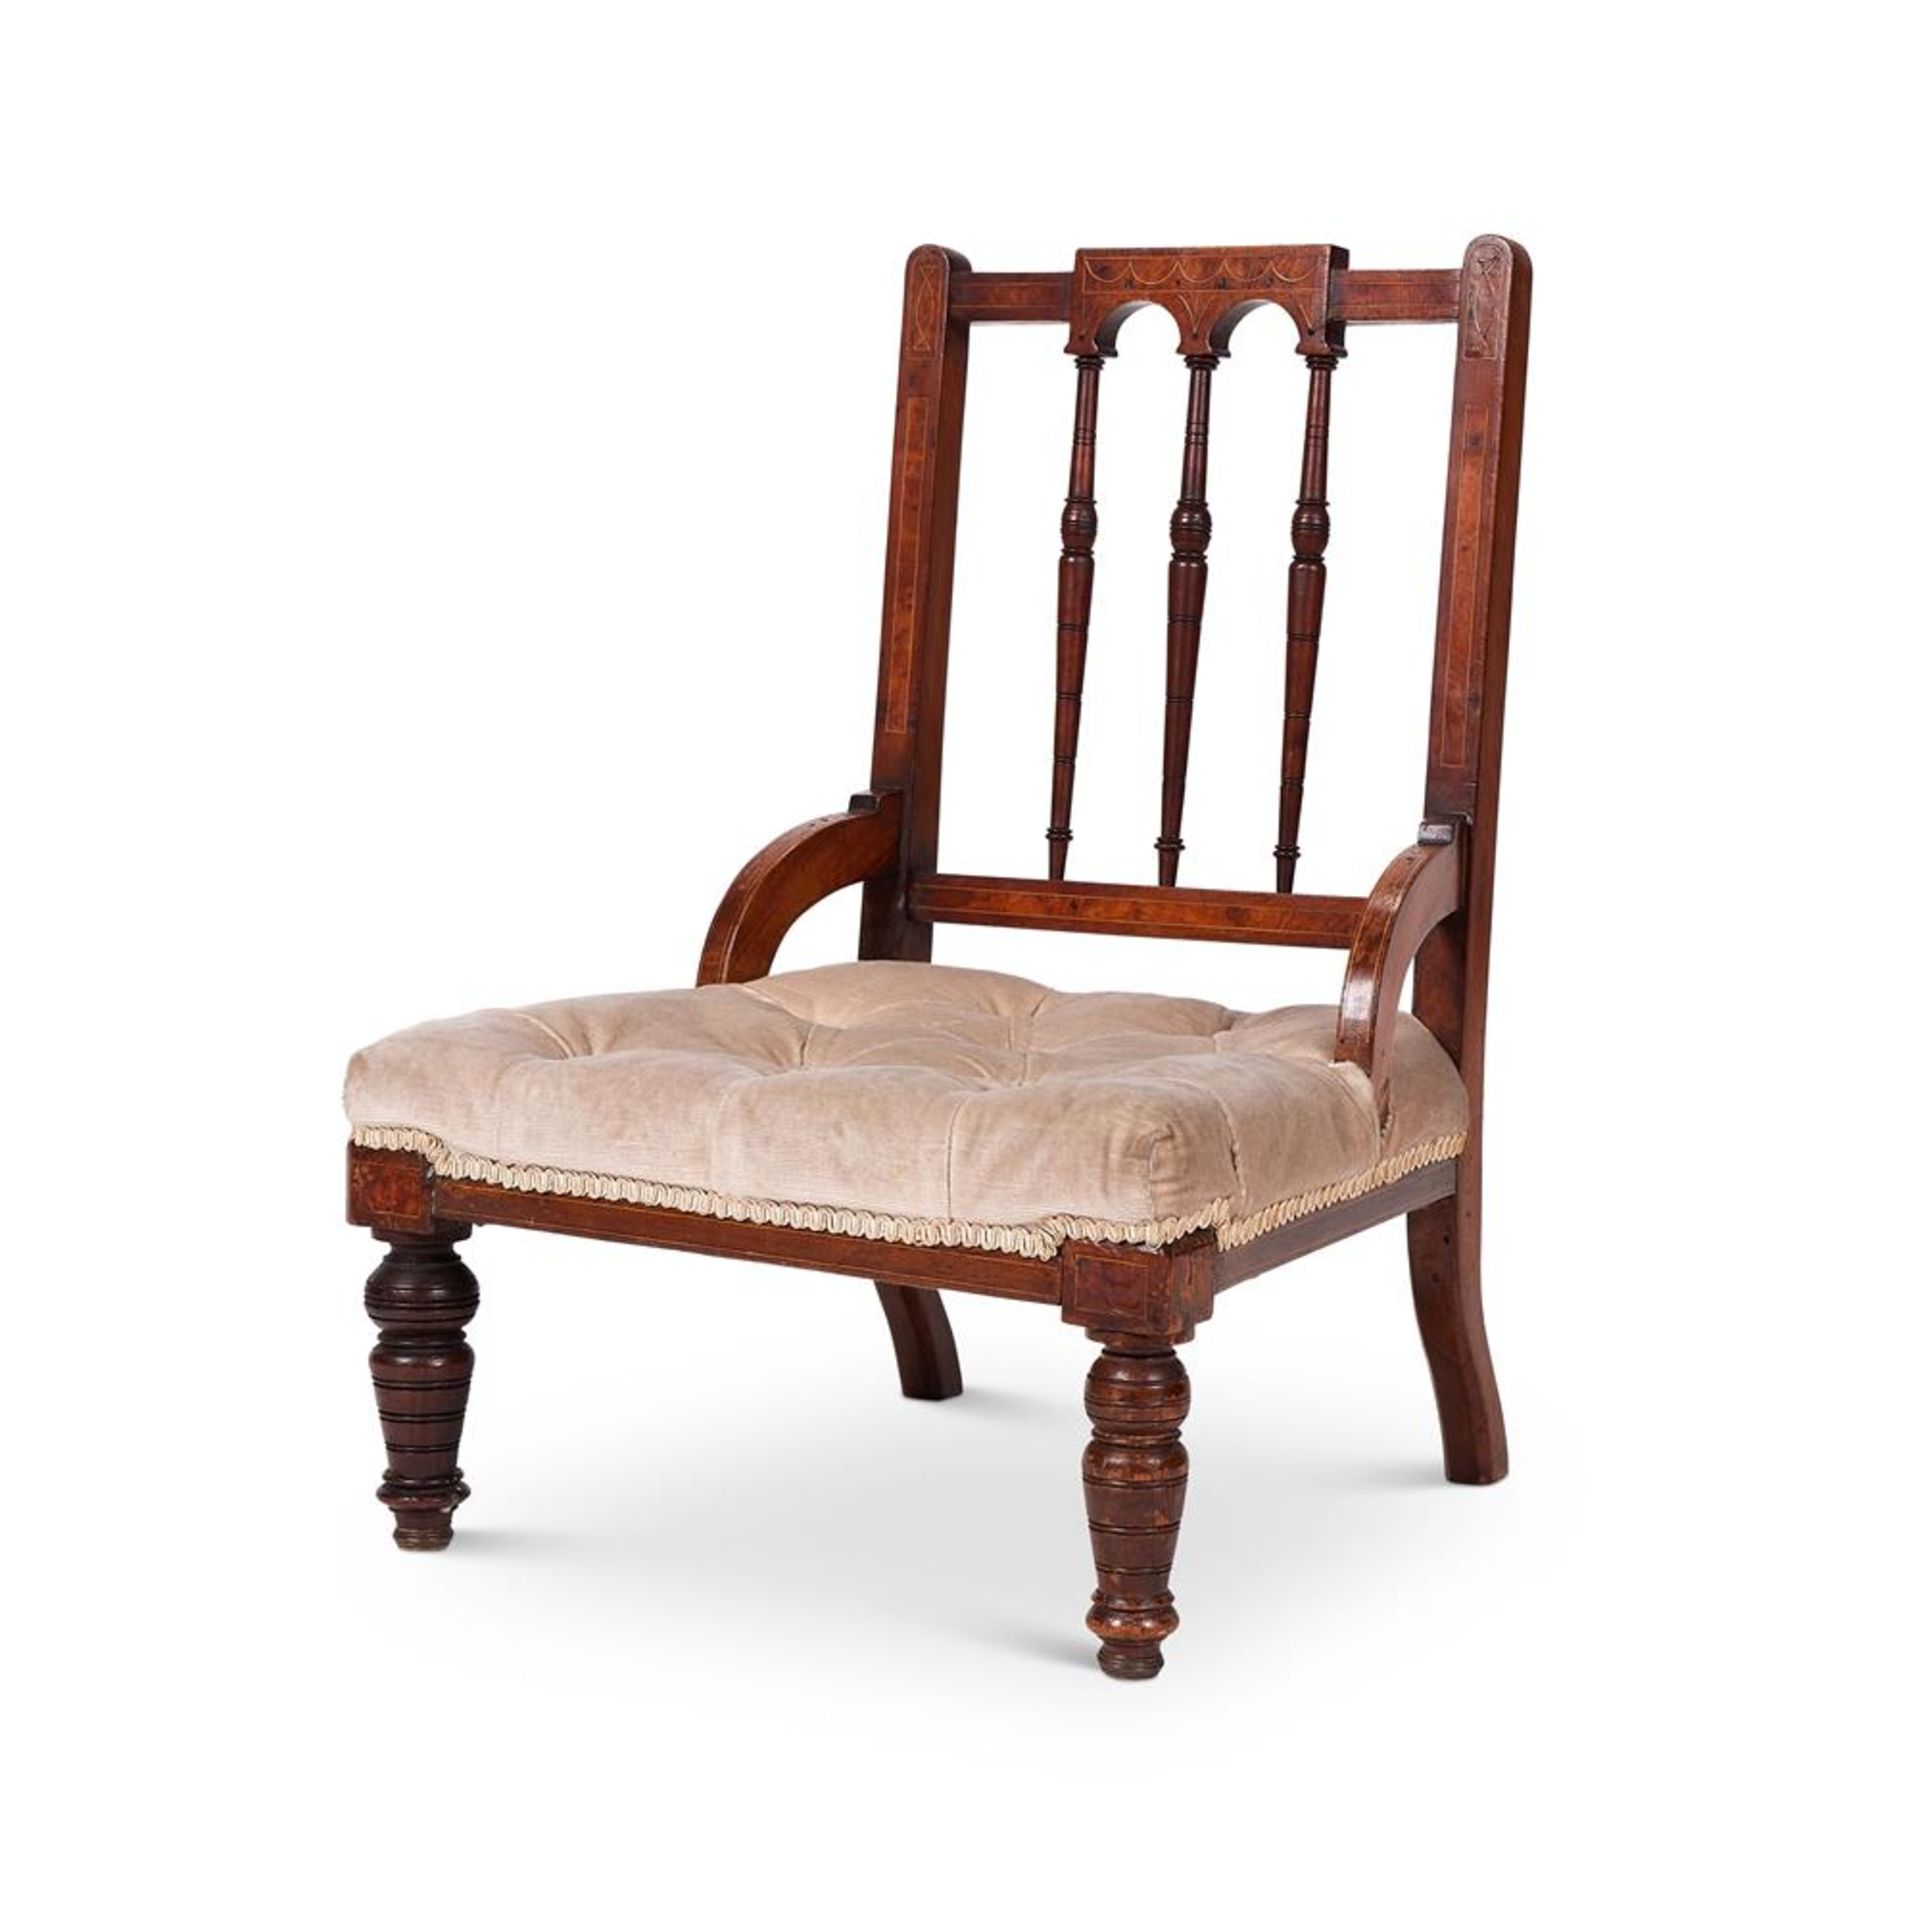 A MATCHED PAIR OF FRENCH WALNUT FAUTEUILS, 19TH CENTURY - Image 2 of 2